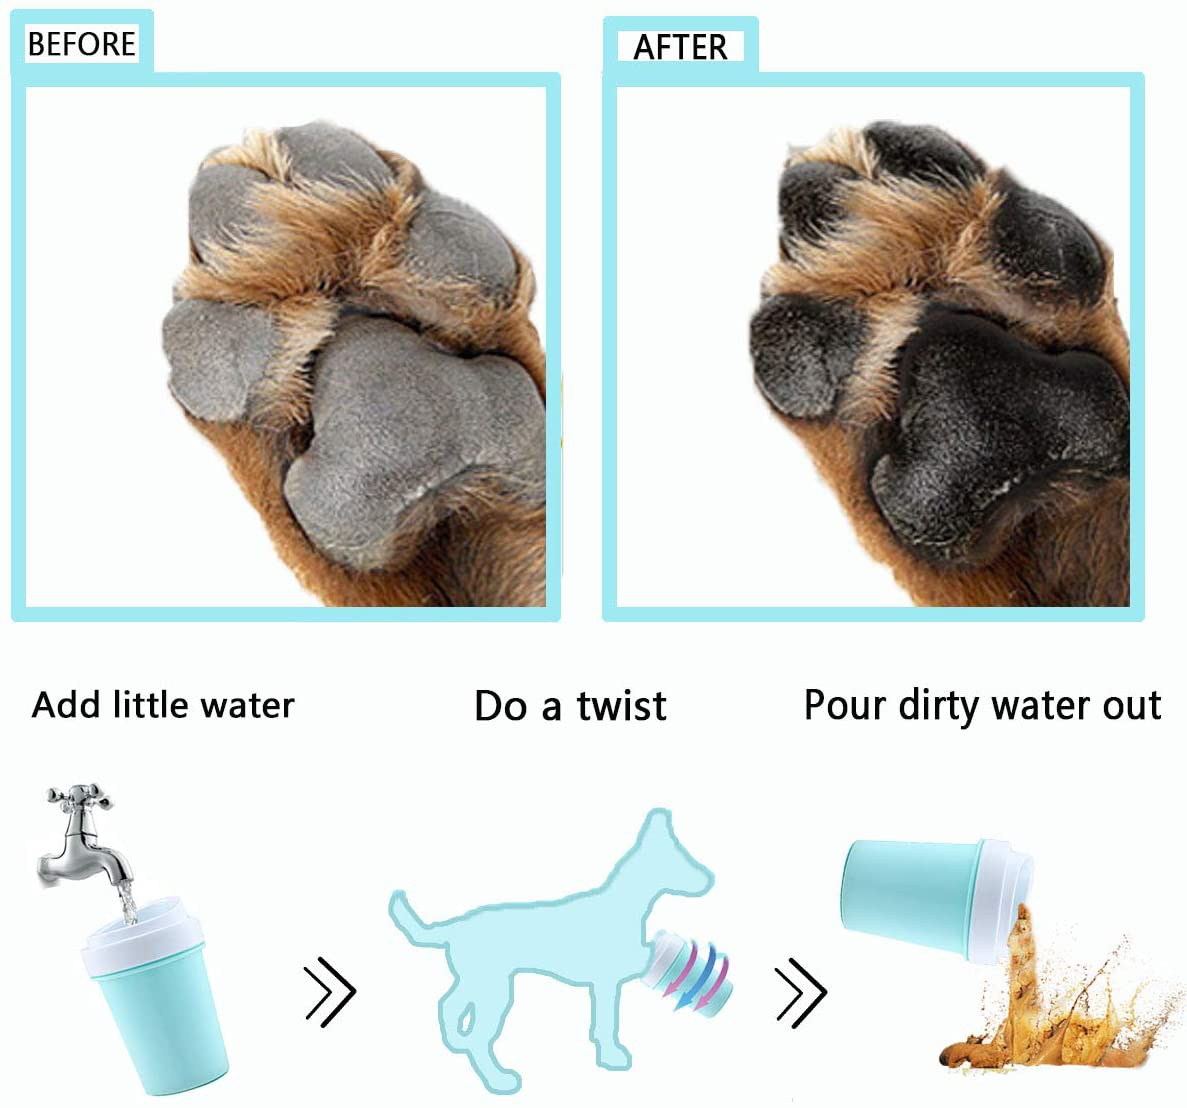 Easy to Use Portable Dog Paw Cleaner Cup Dog Foot Washer with Silicone Washers Nice Packing